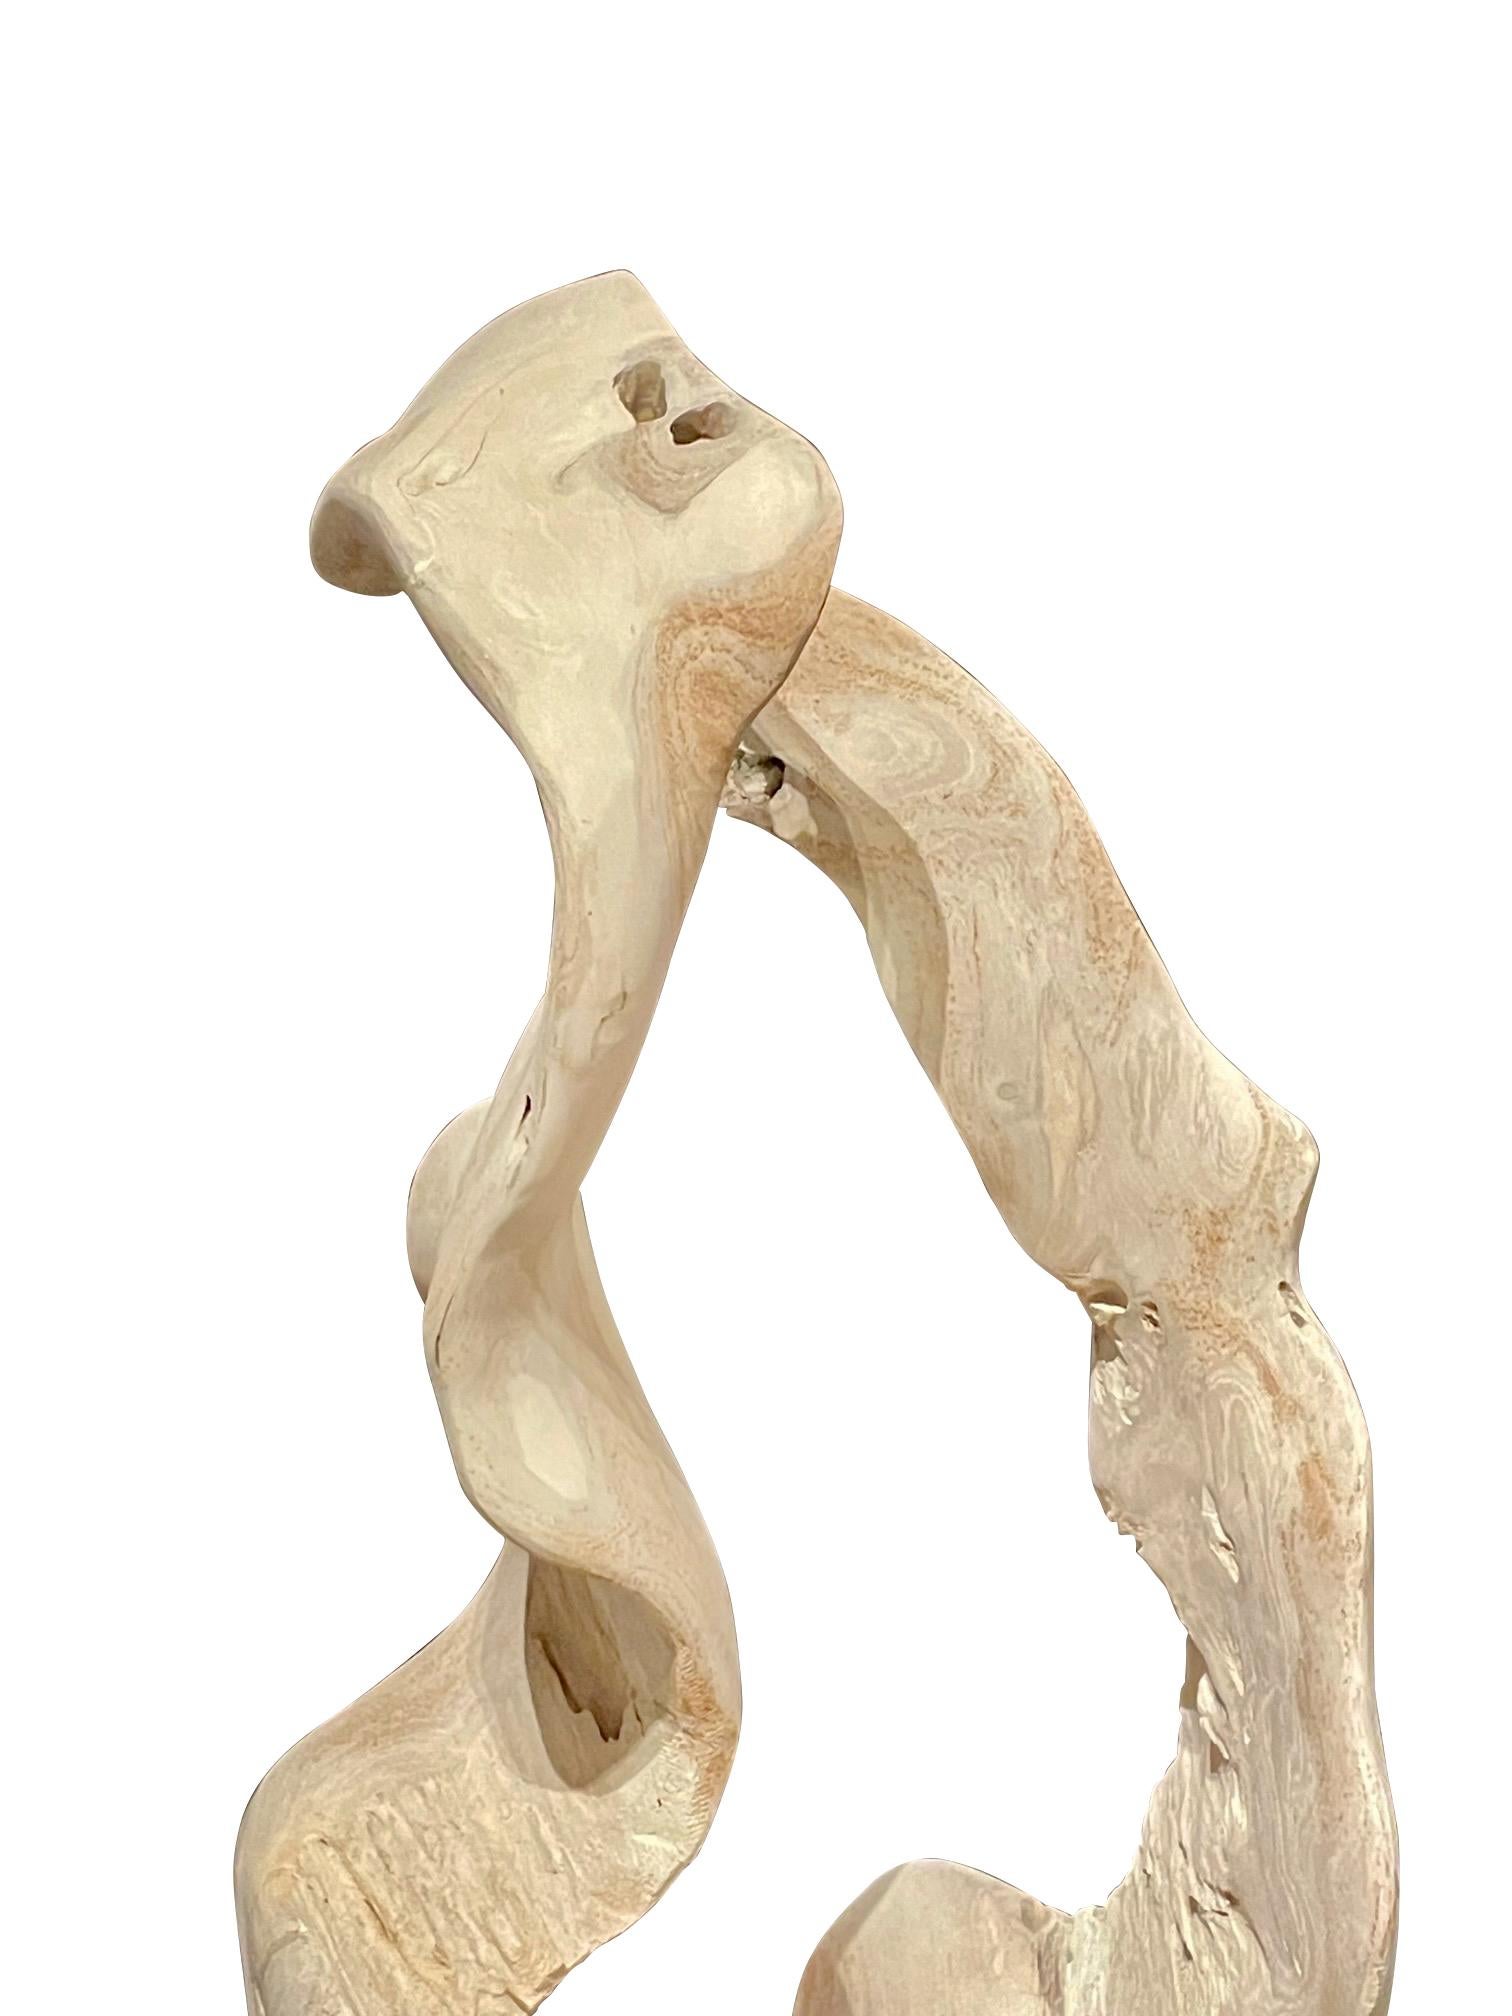 Indonesian Bleached Teak Wood Free Form Sculpture, Indonesia, Contemporary For Sale